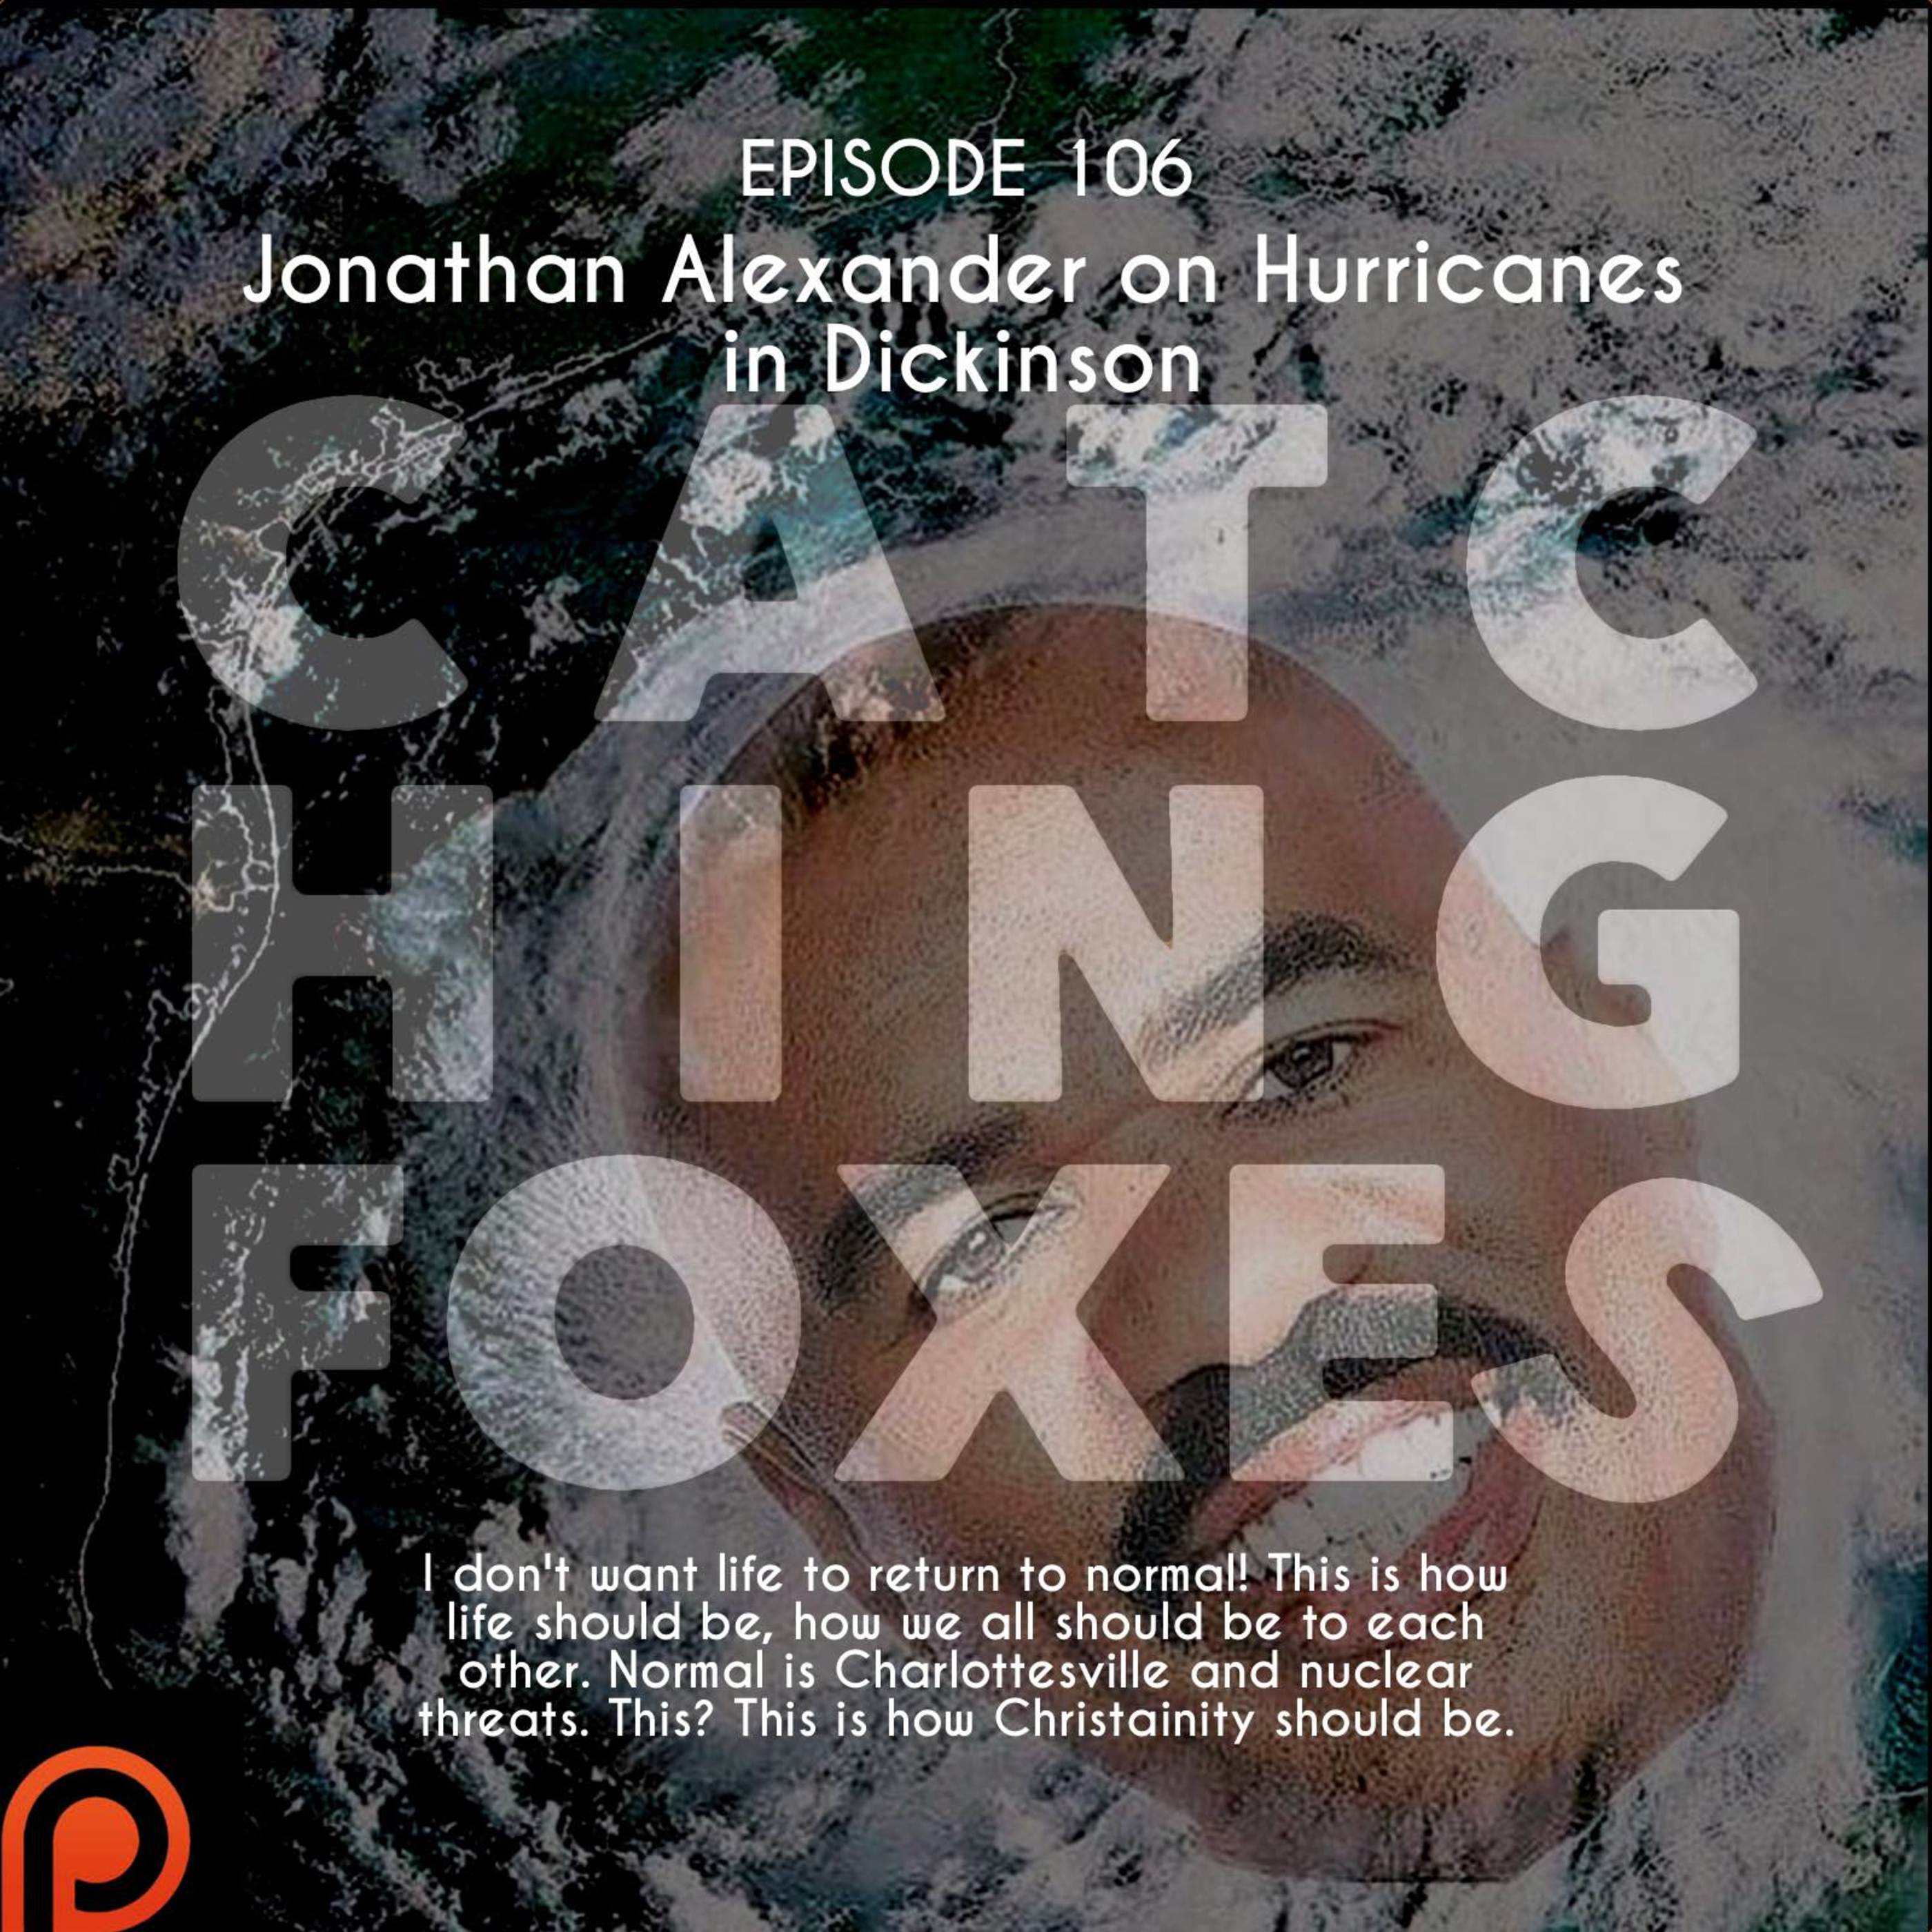 Episode 106: Jonathan Alexander and Hurricanes in Dickinson